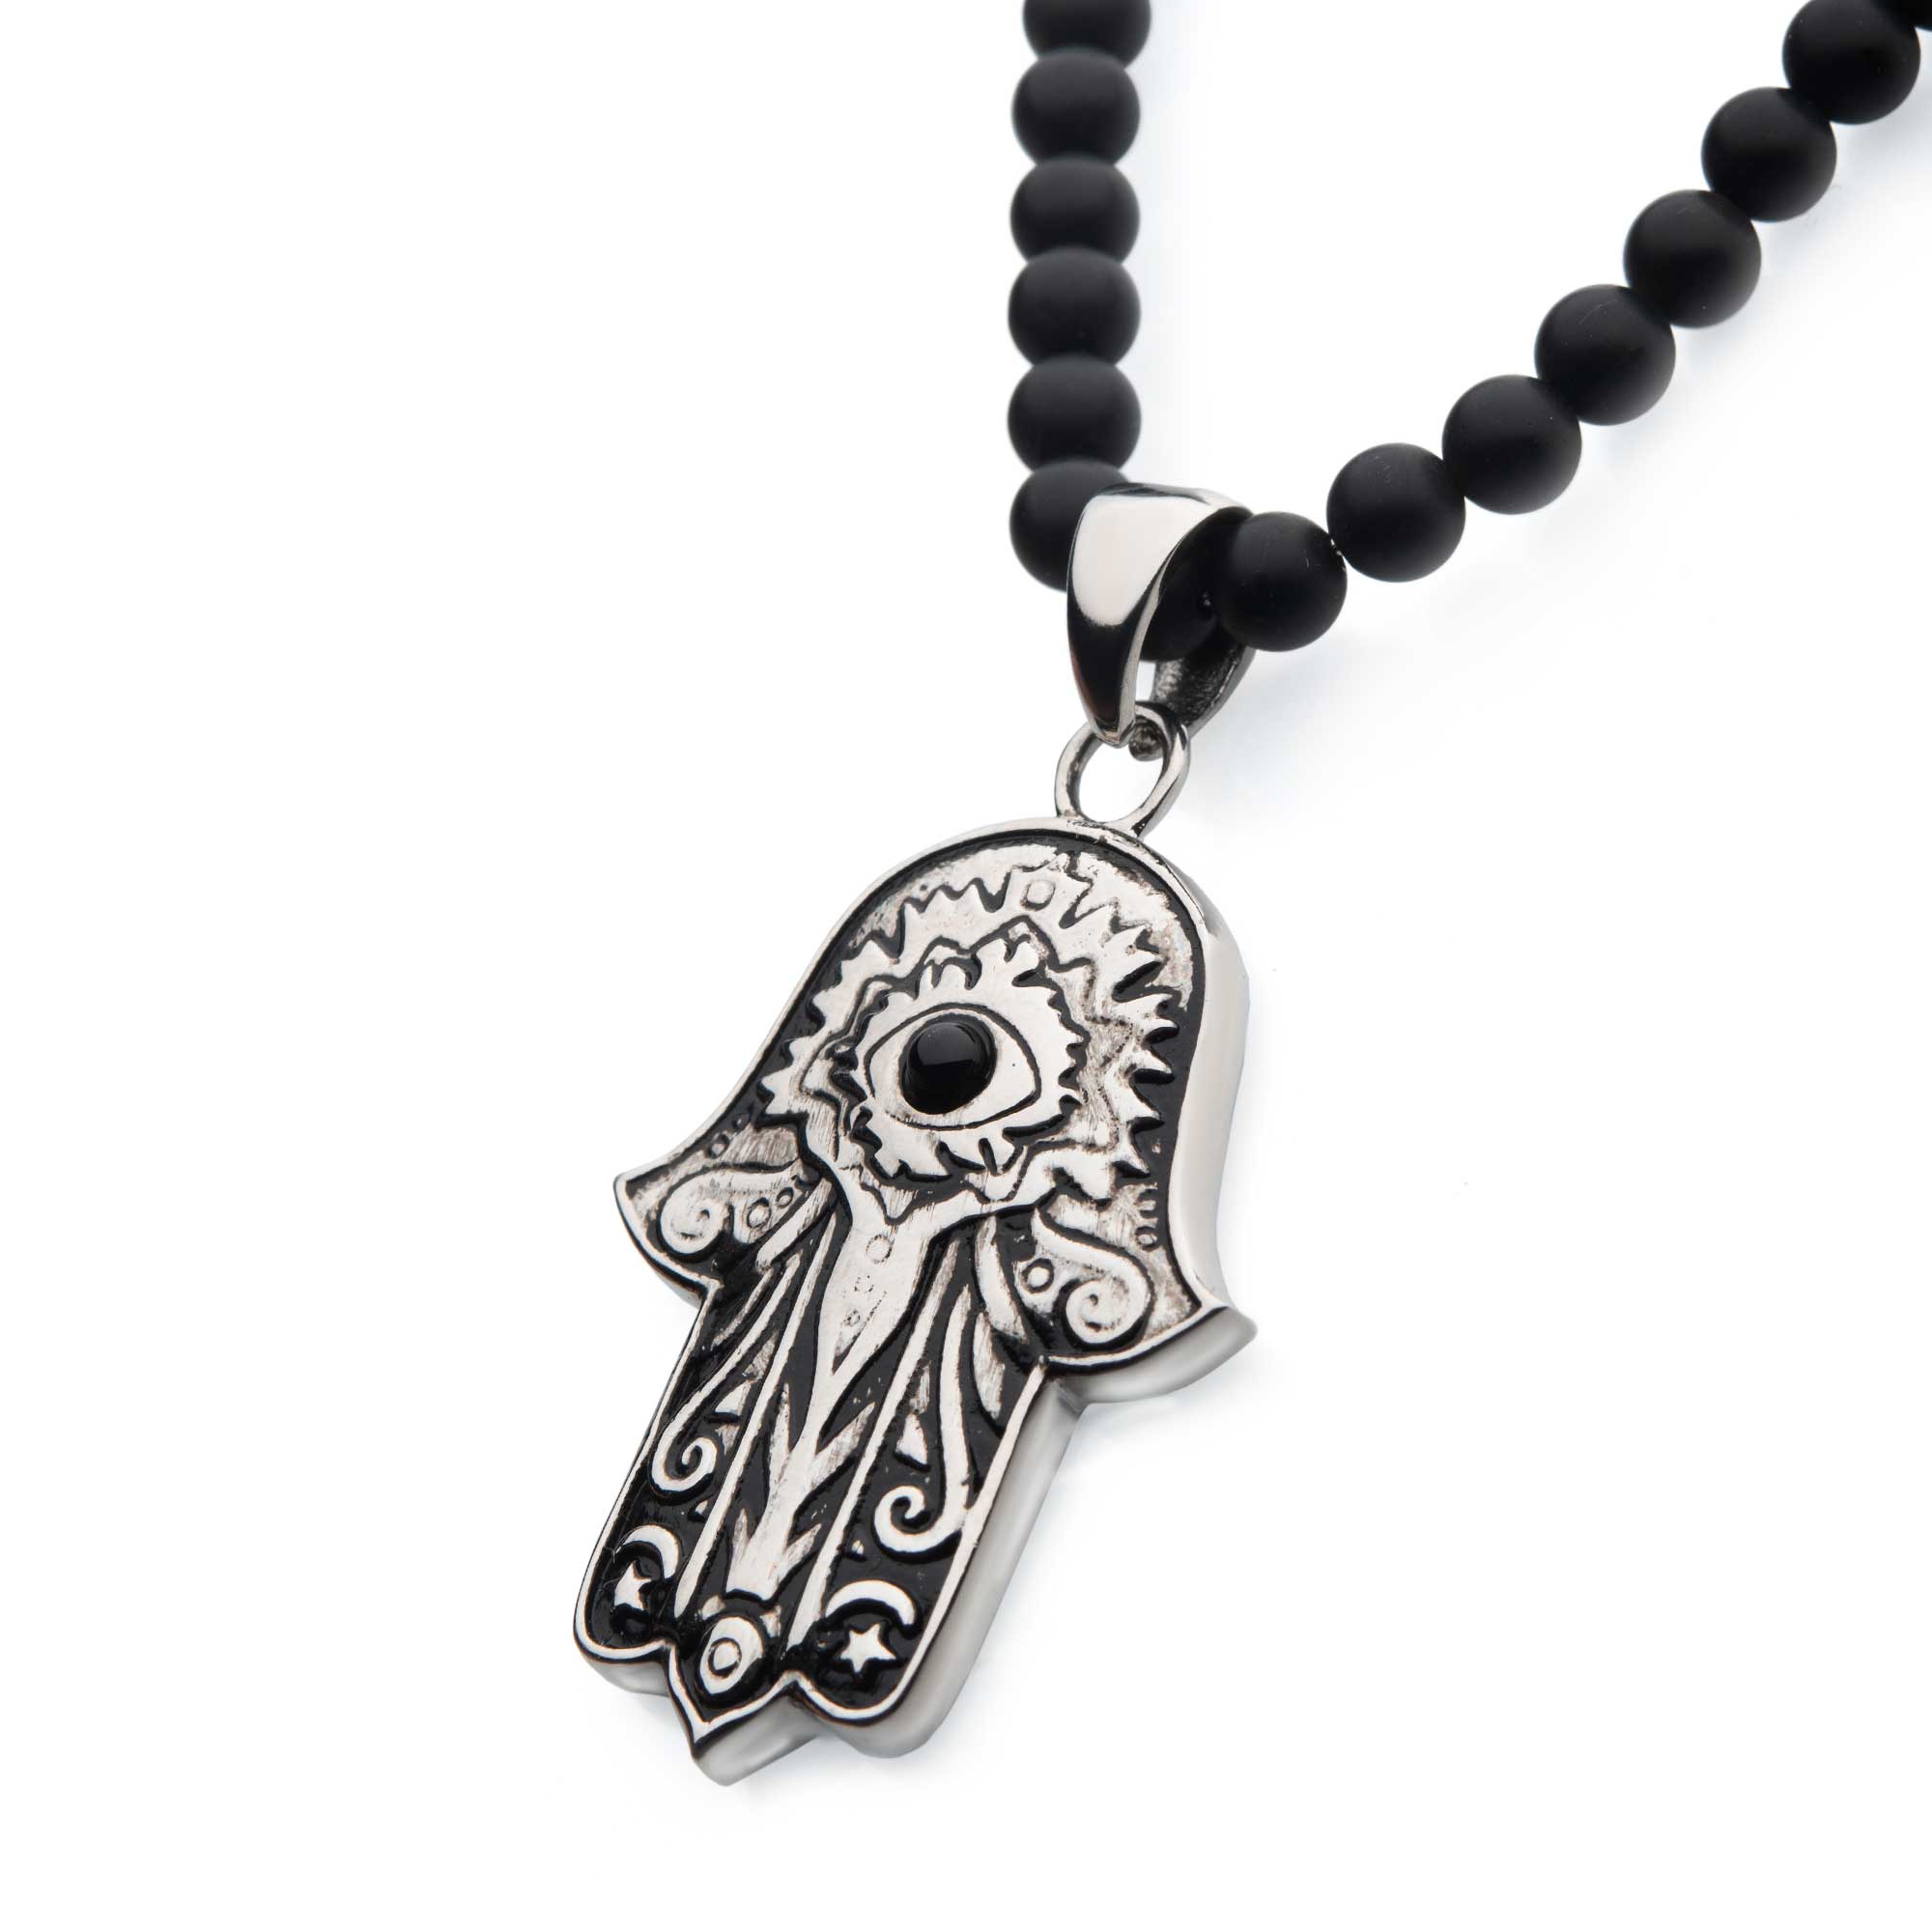 Stainless Steel with Centerpiece Black Agate Stone Hamsa Pendant, with Black Agate Stone Bead Necklace Image 2 Mitchell's Jewelry Norman, OK